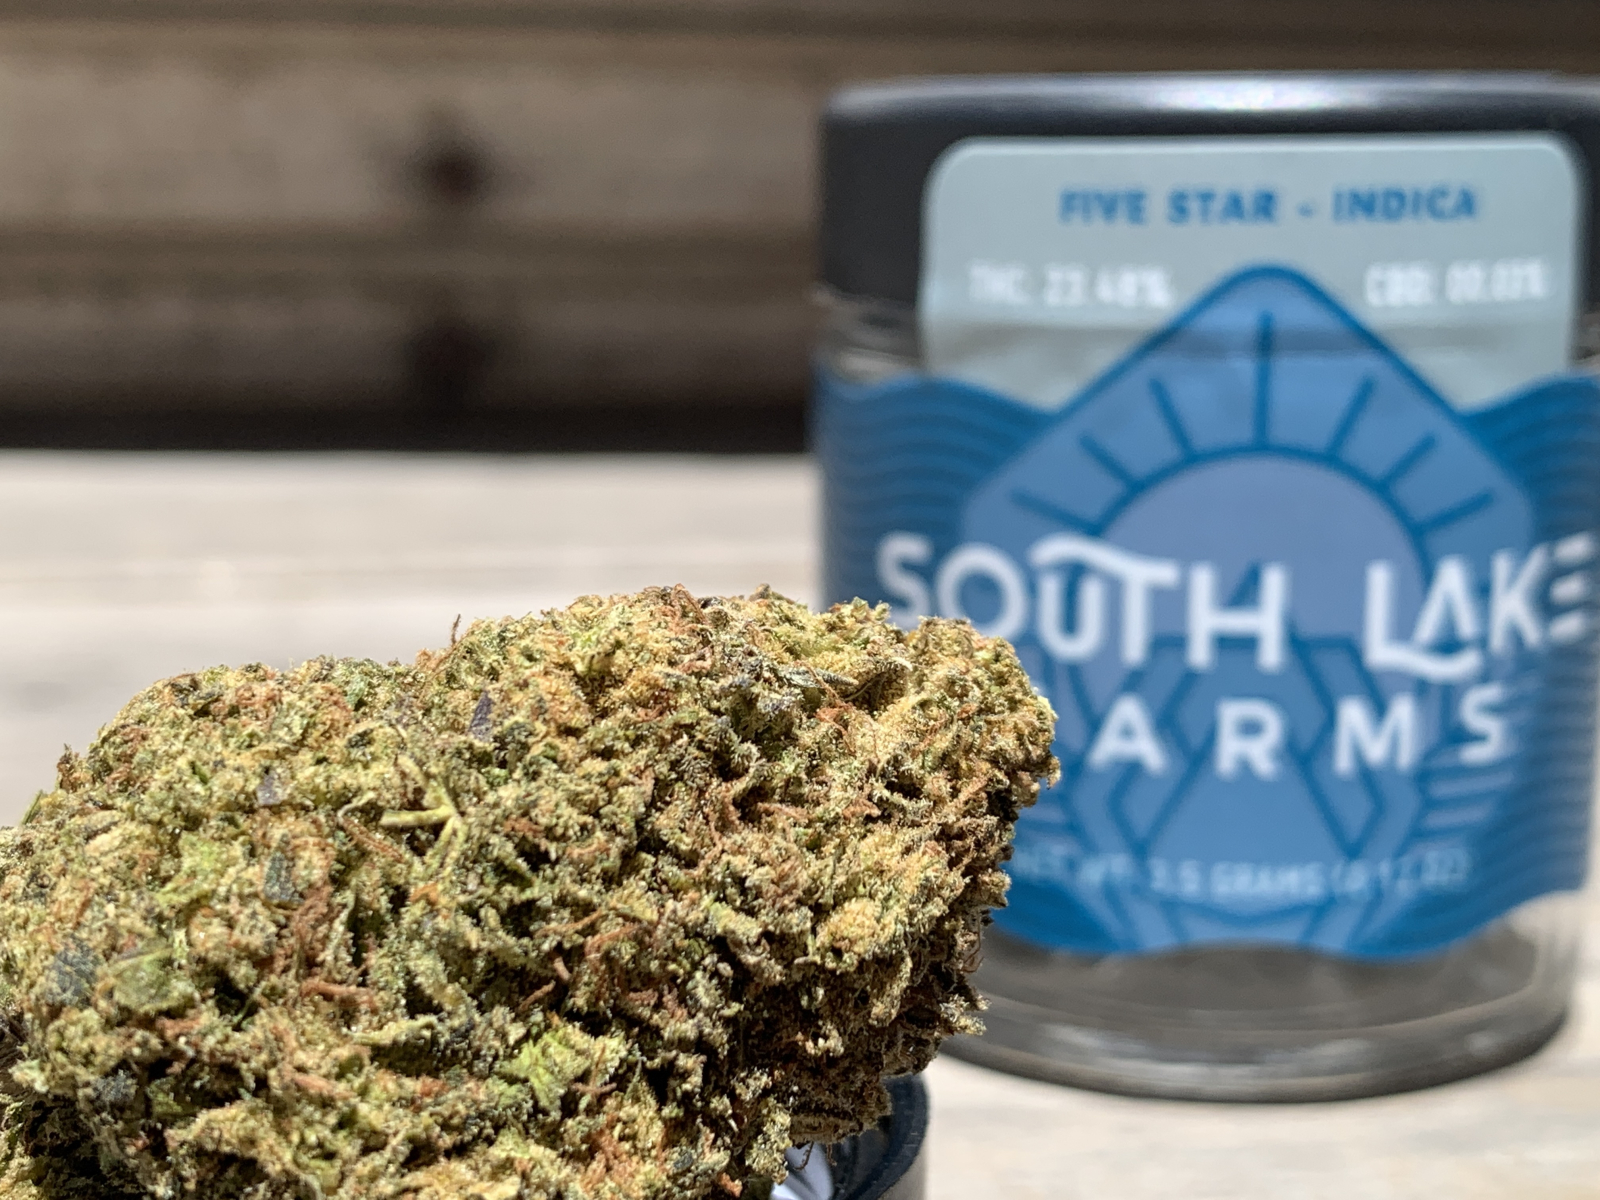 South Lake Farms Five Star packaged eighth